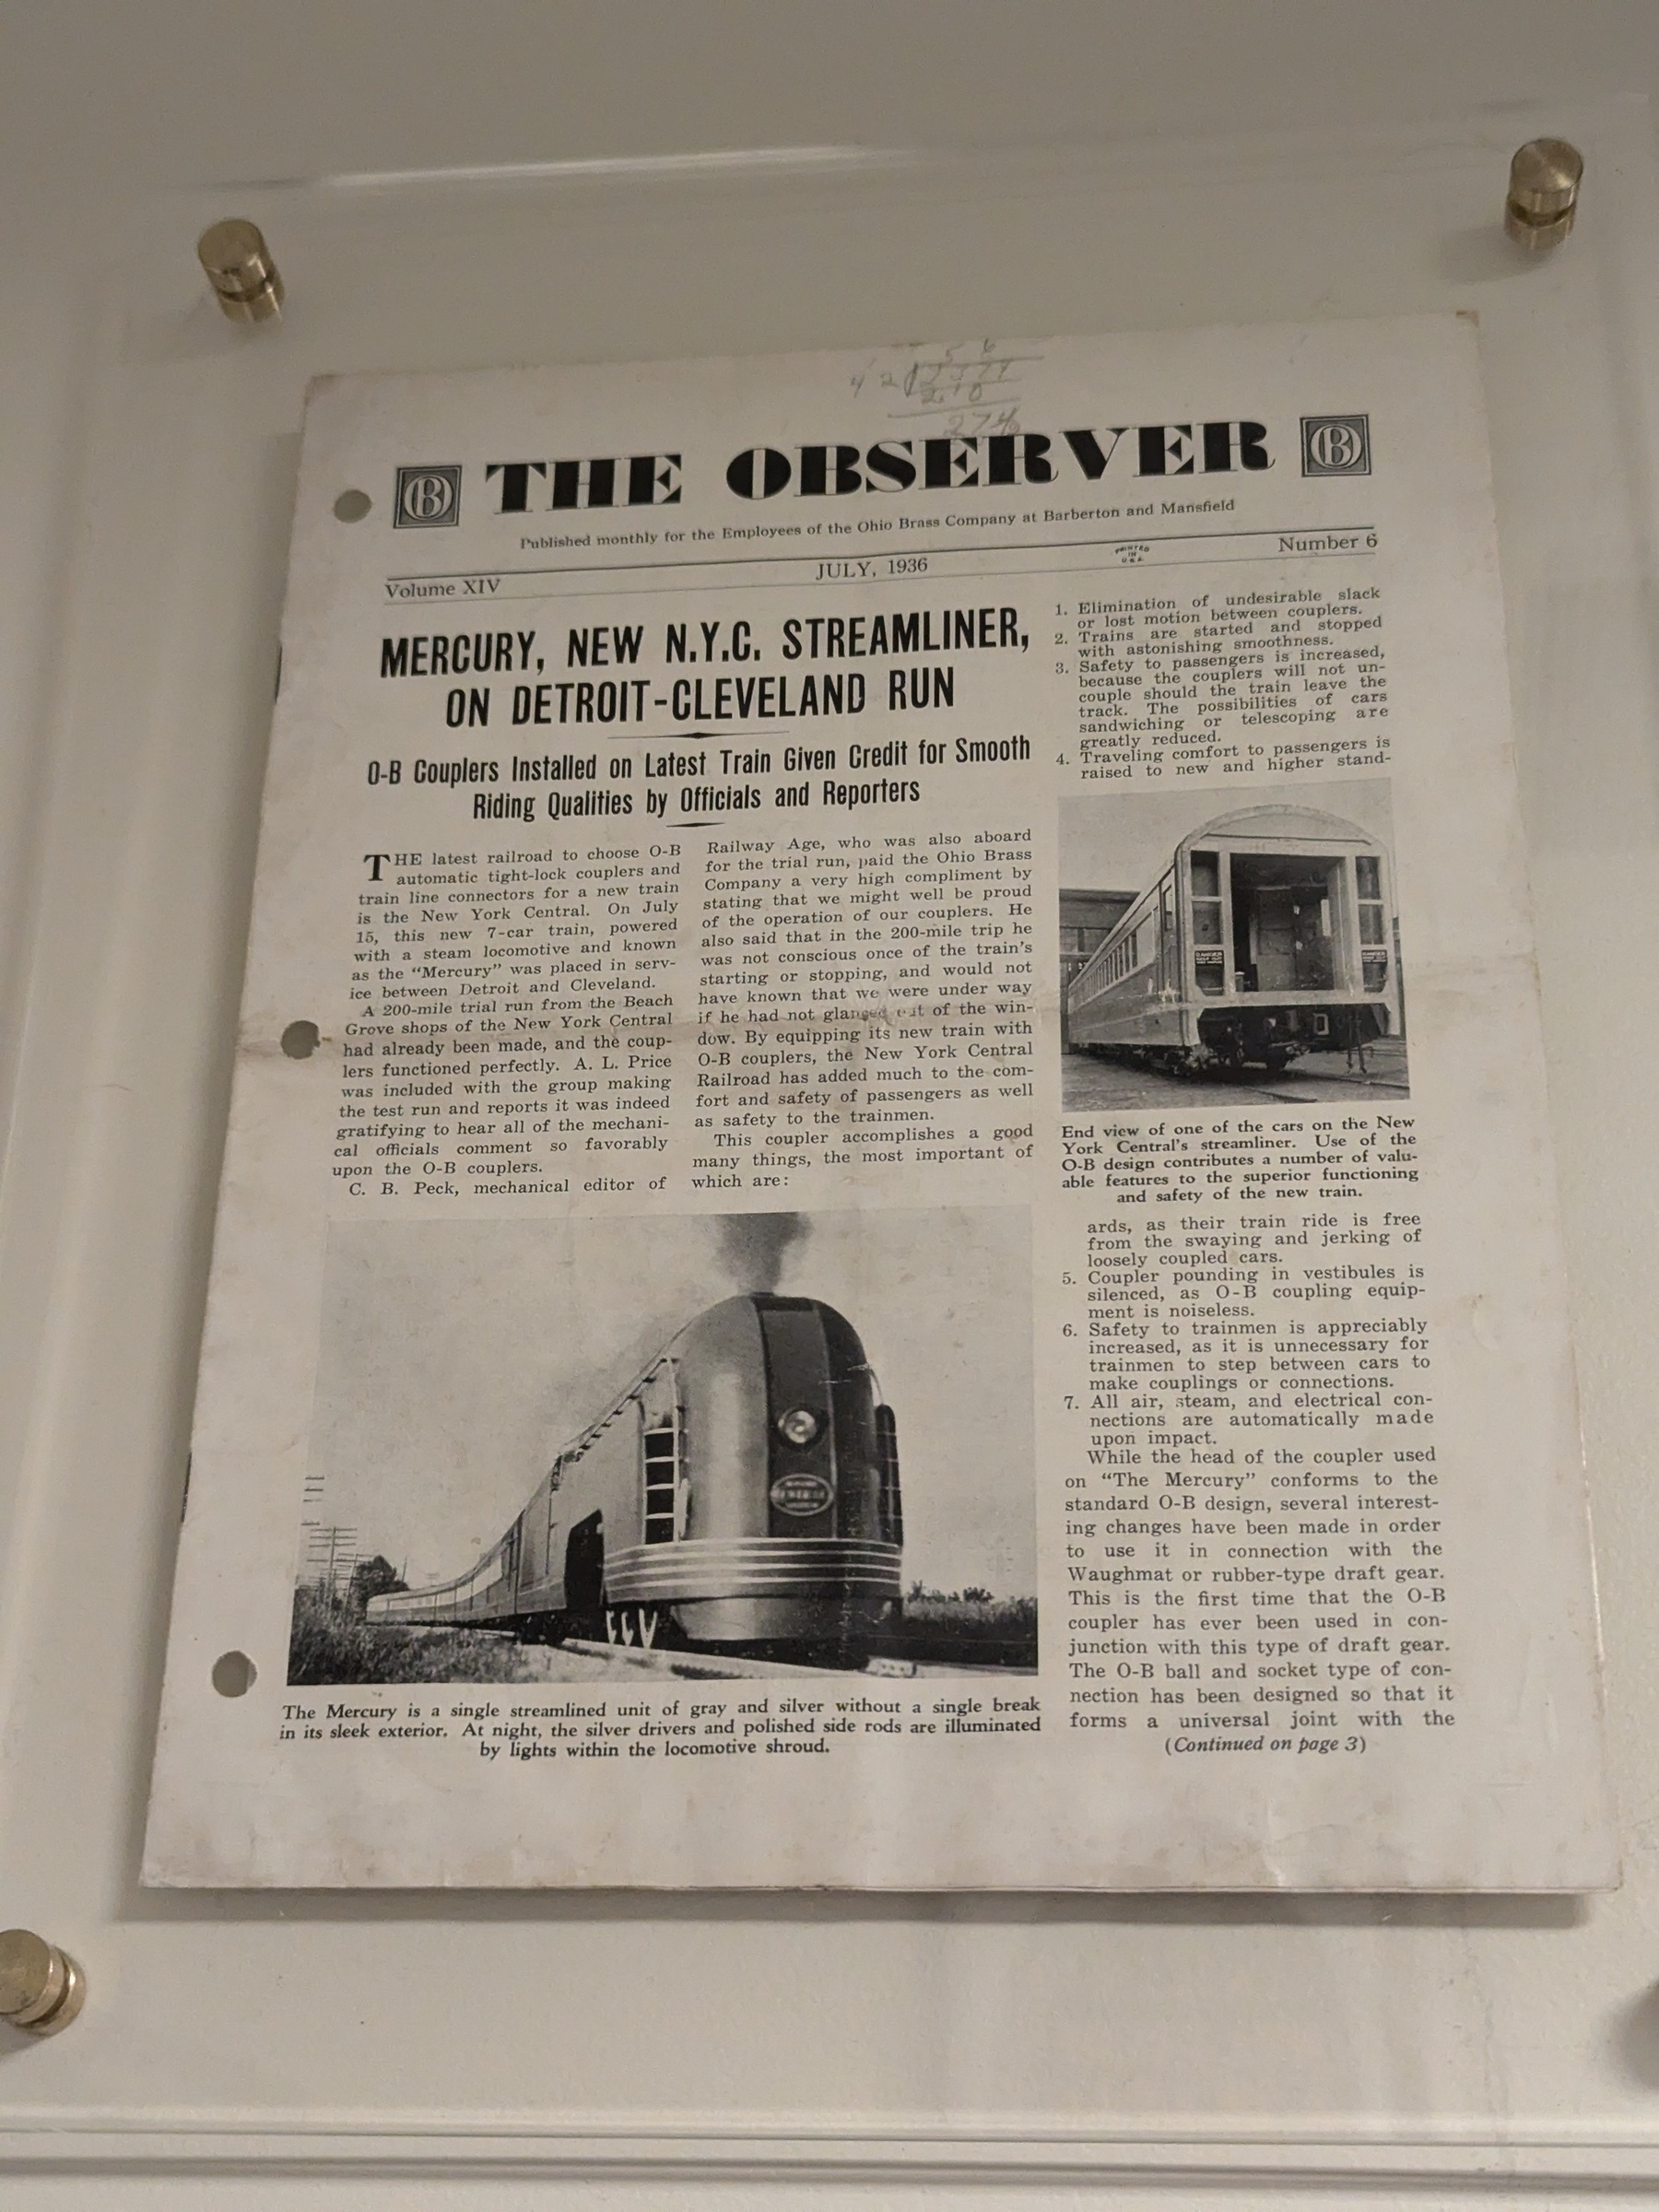 An issue of The Observer from July, 1936 titled "Mercury, New N.Y.C. Streamliner, on Detroit-Cleveland Run"